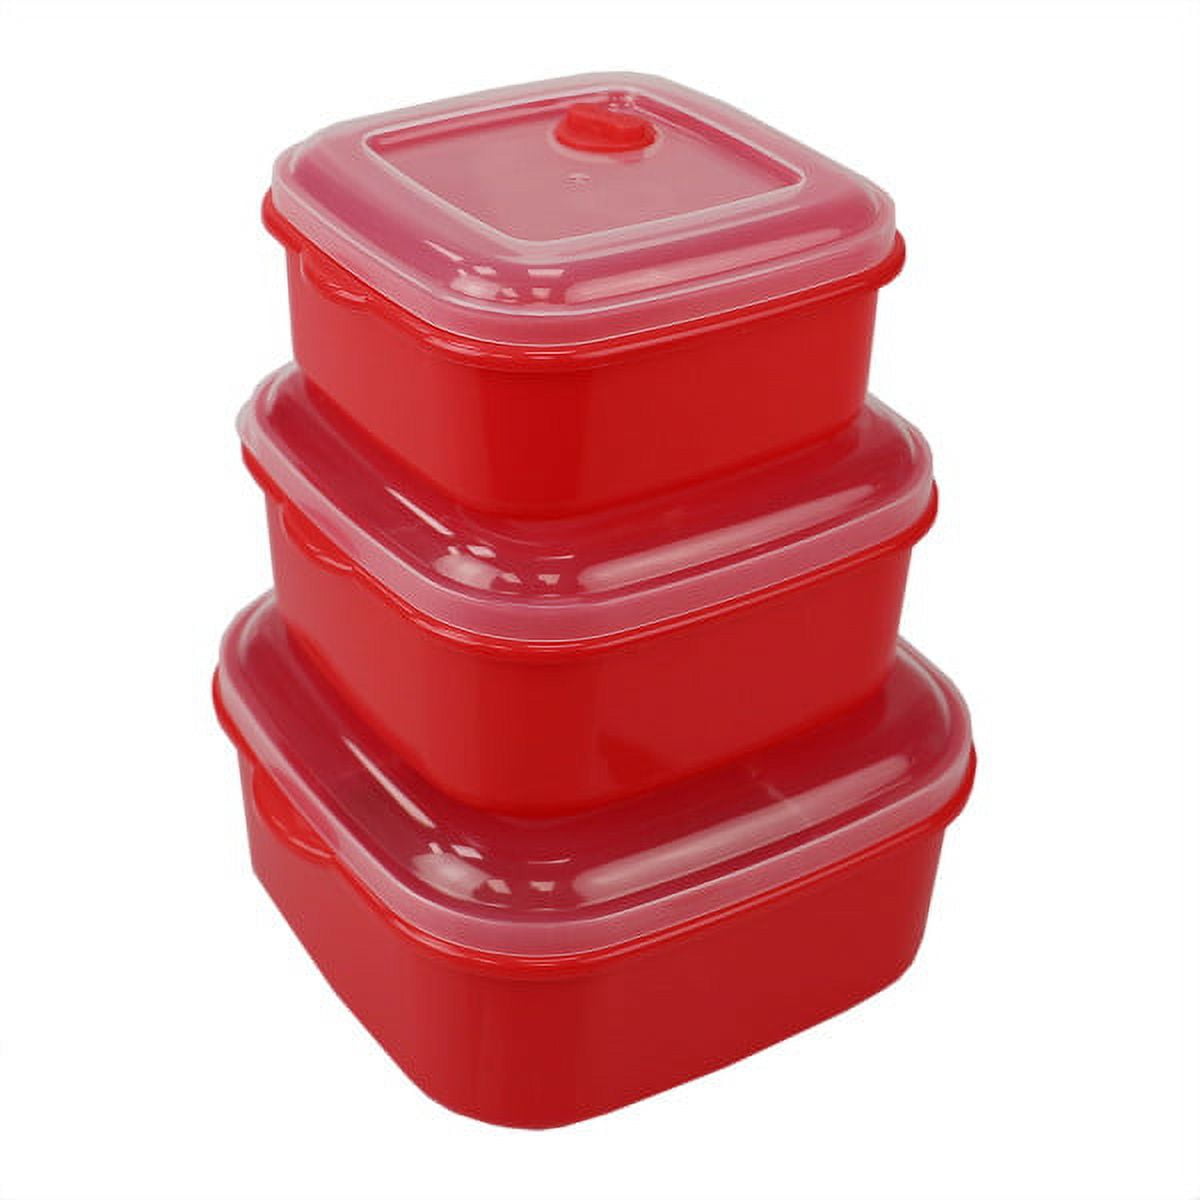 Microwave Safe Plastic Square Food Storage Containers (Pack of 3